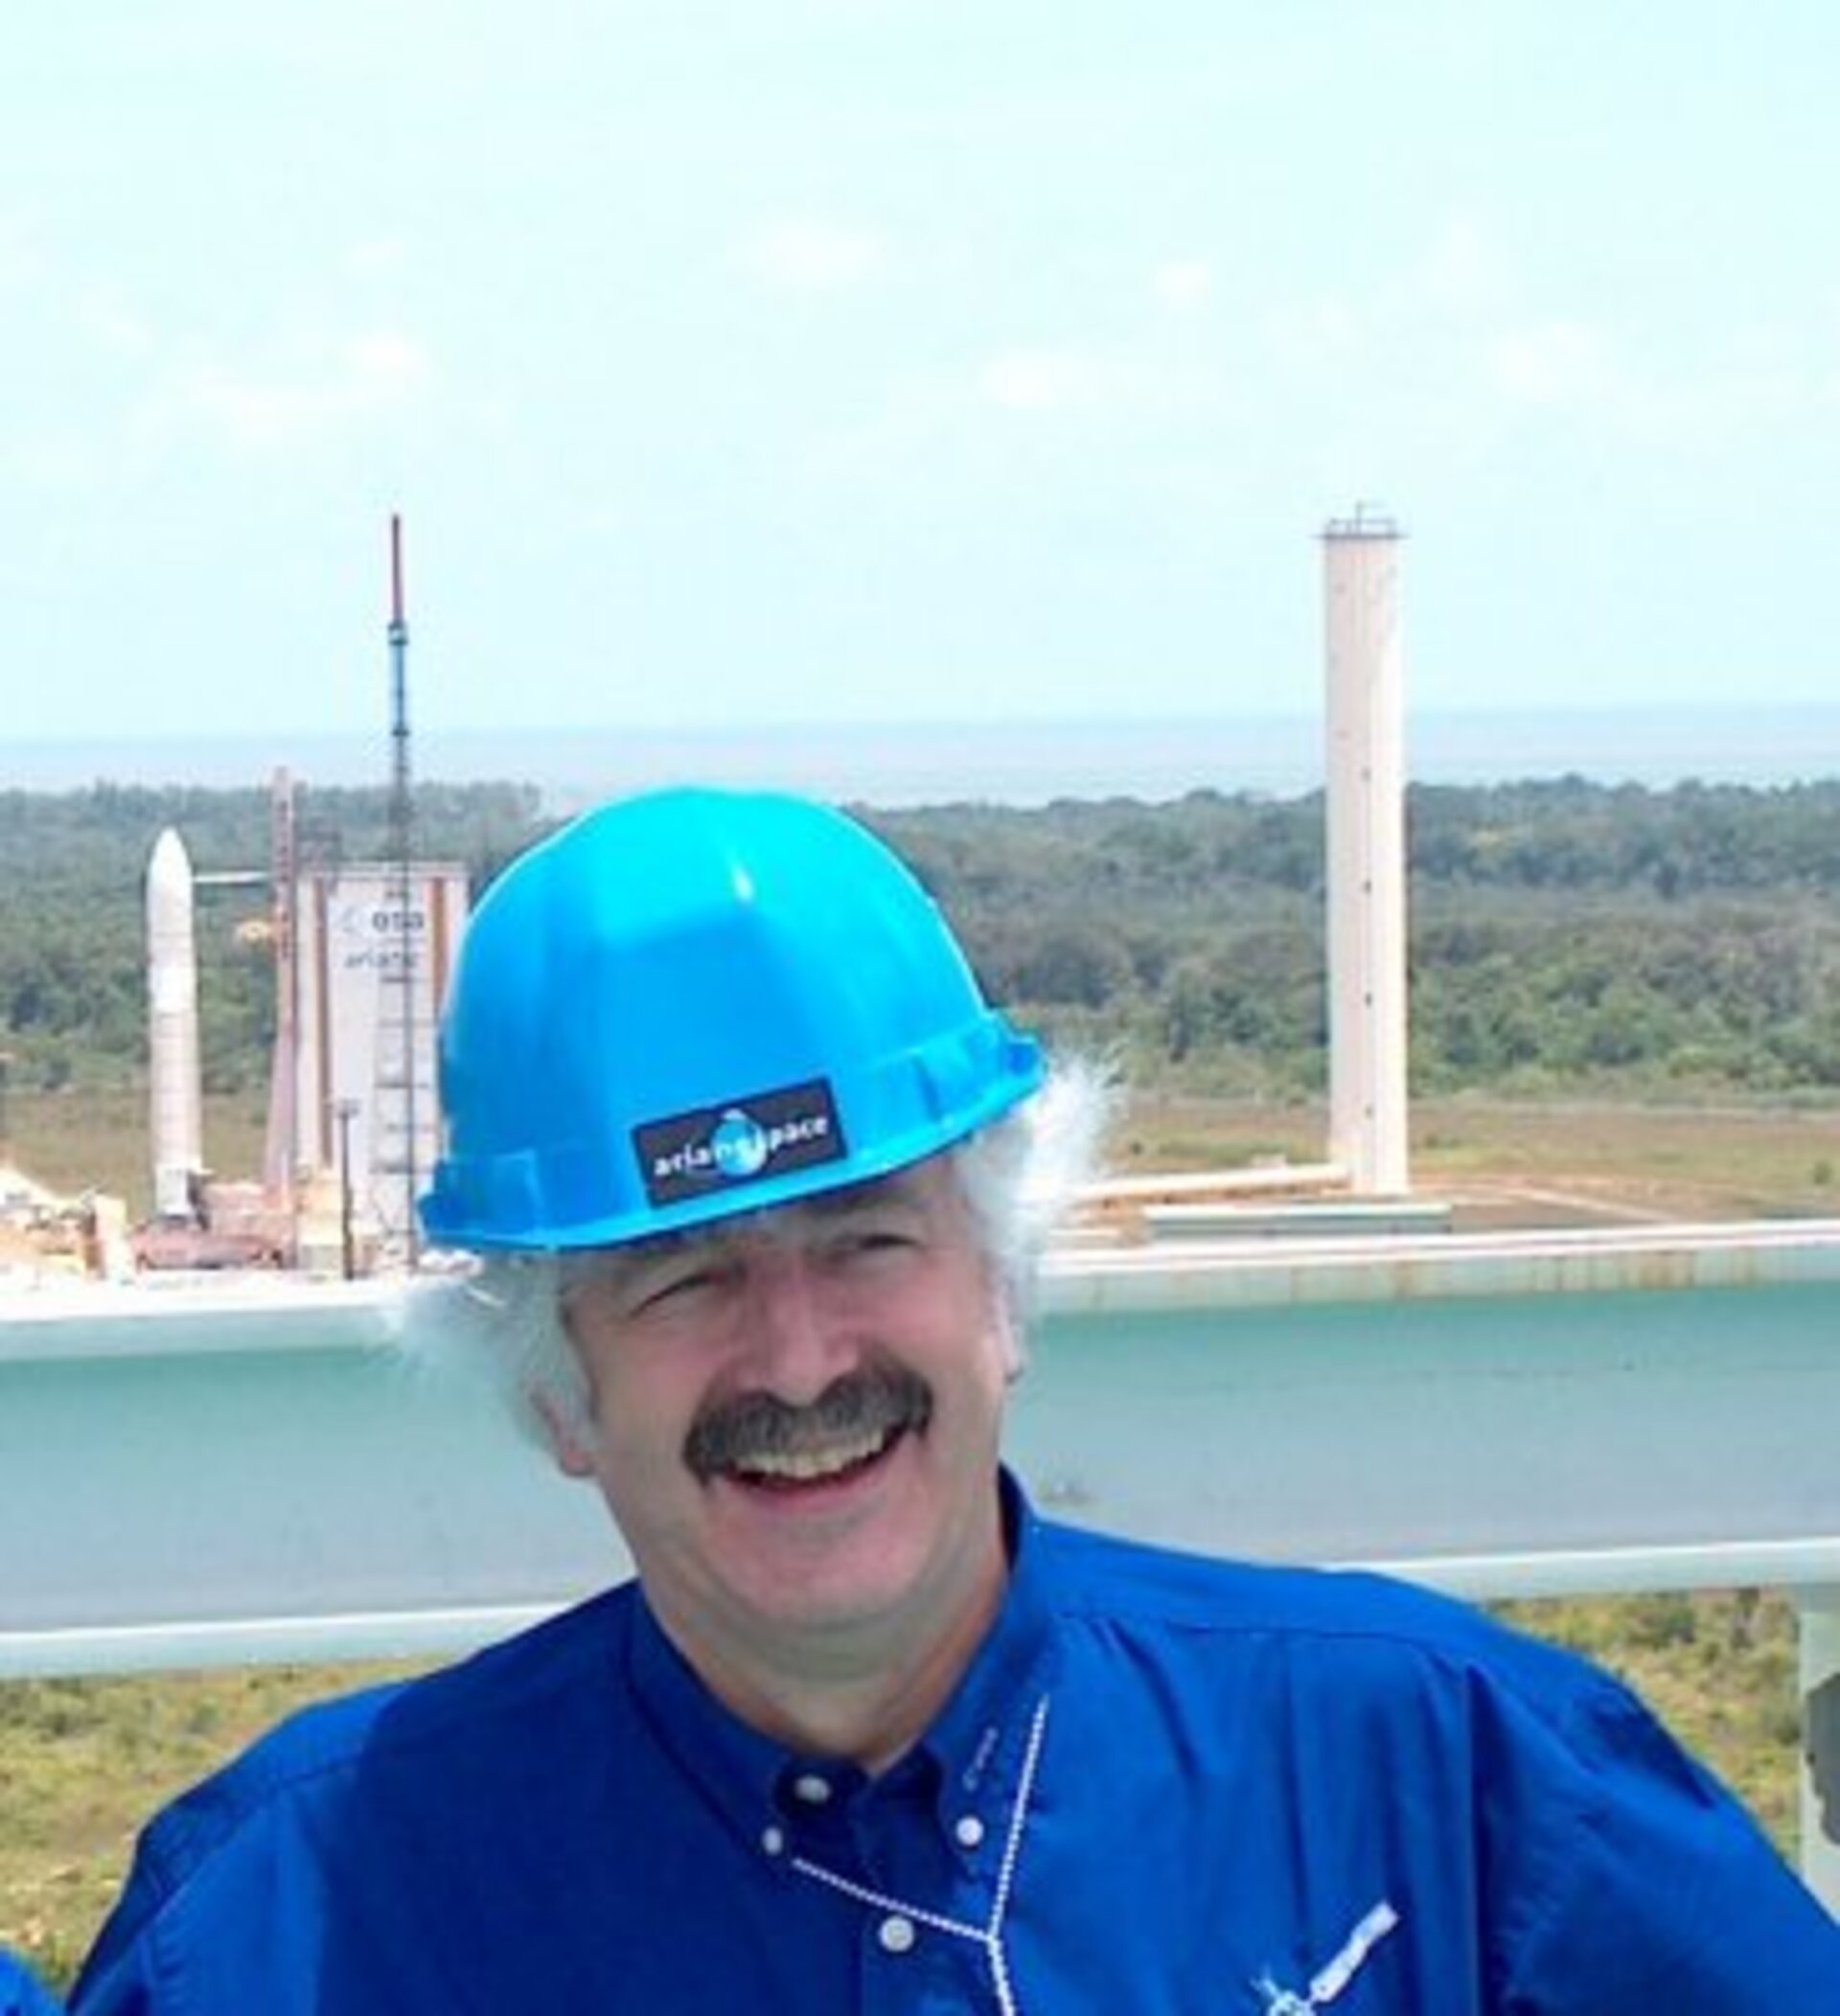 David Southwood on top of the Ariane 4 launch tower with Ariane 5 countdown preparations going on in the background